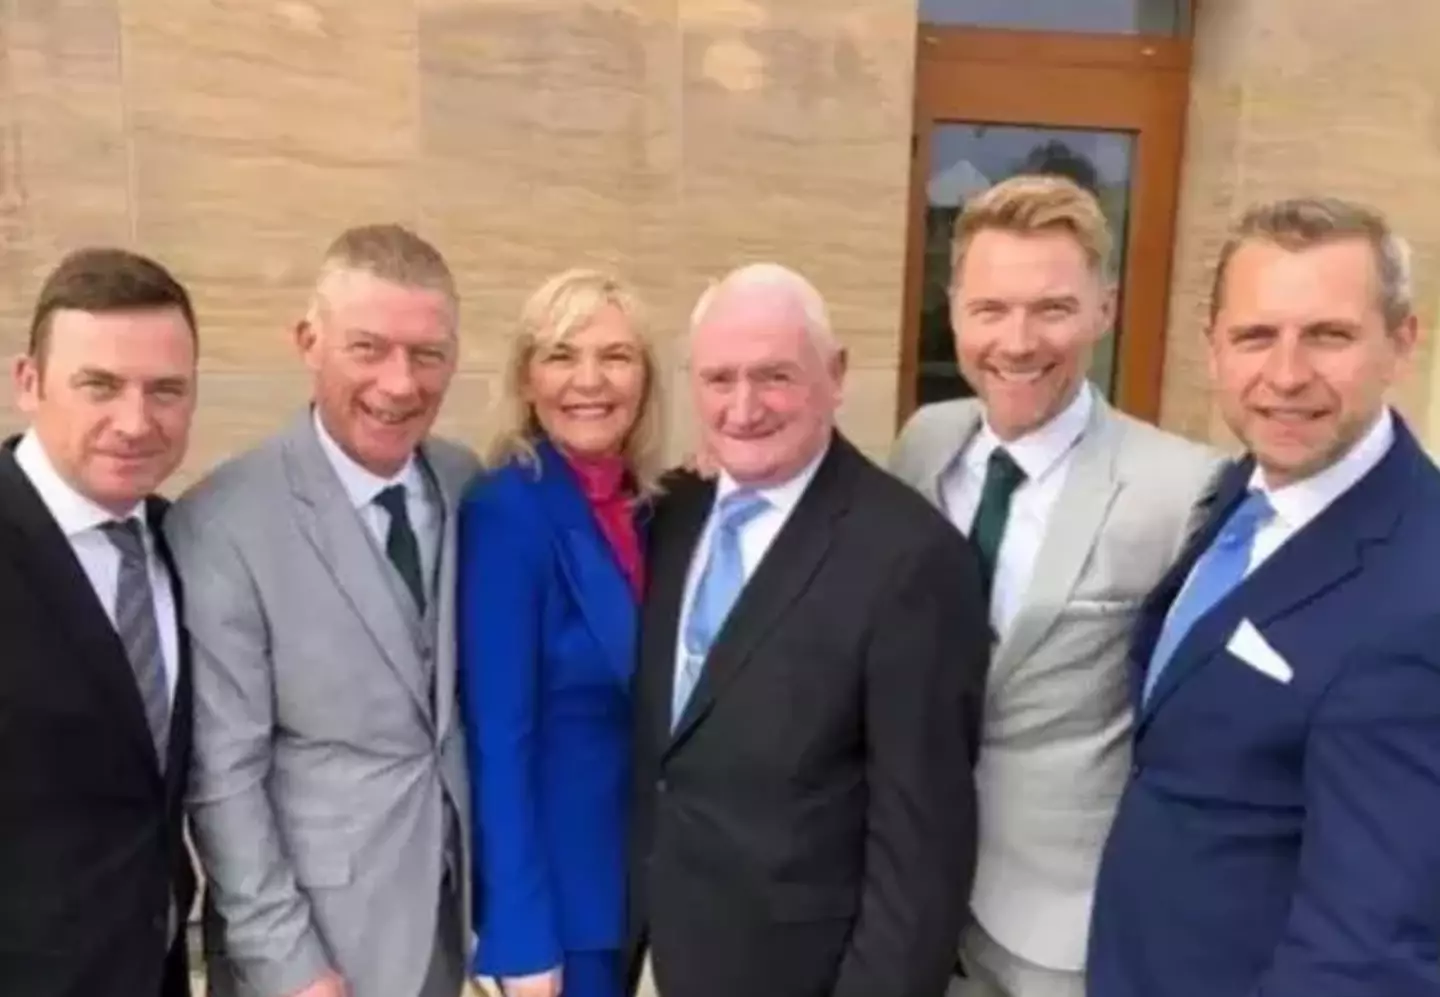 Ciaran Keating (second from left) tragically died in a car crash at the weekend.